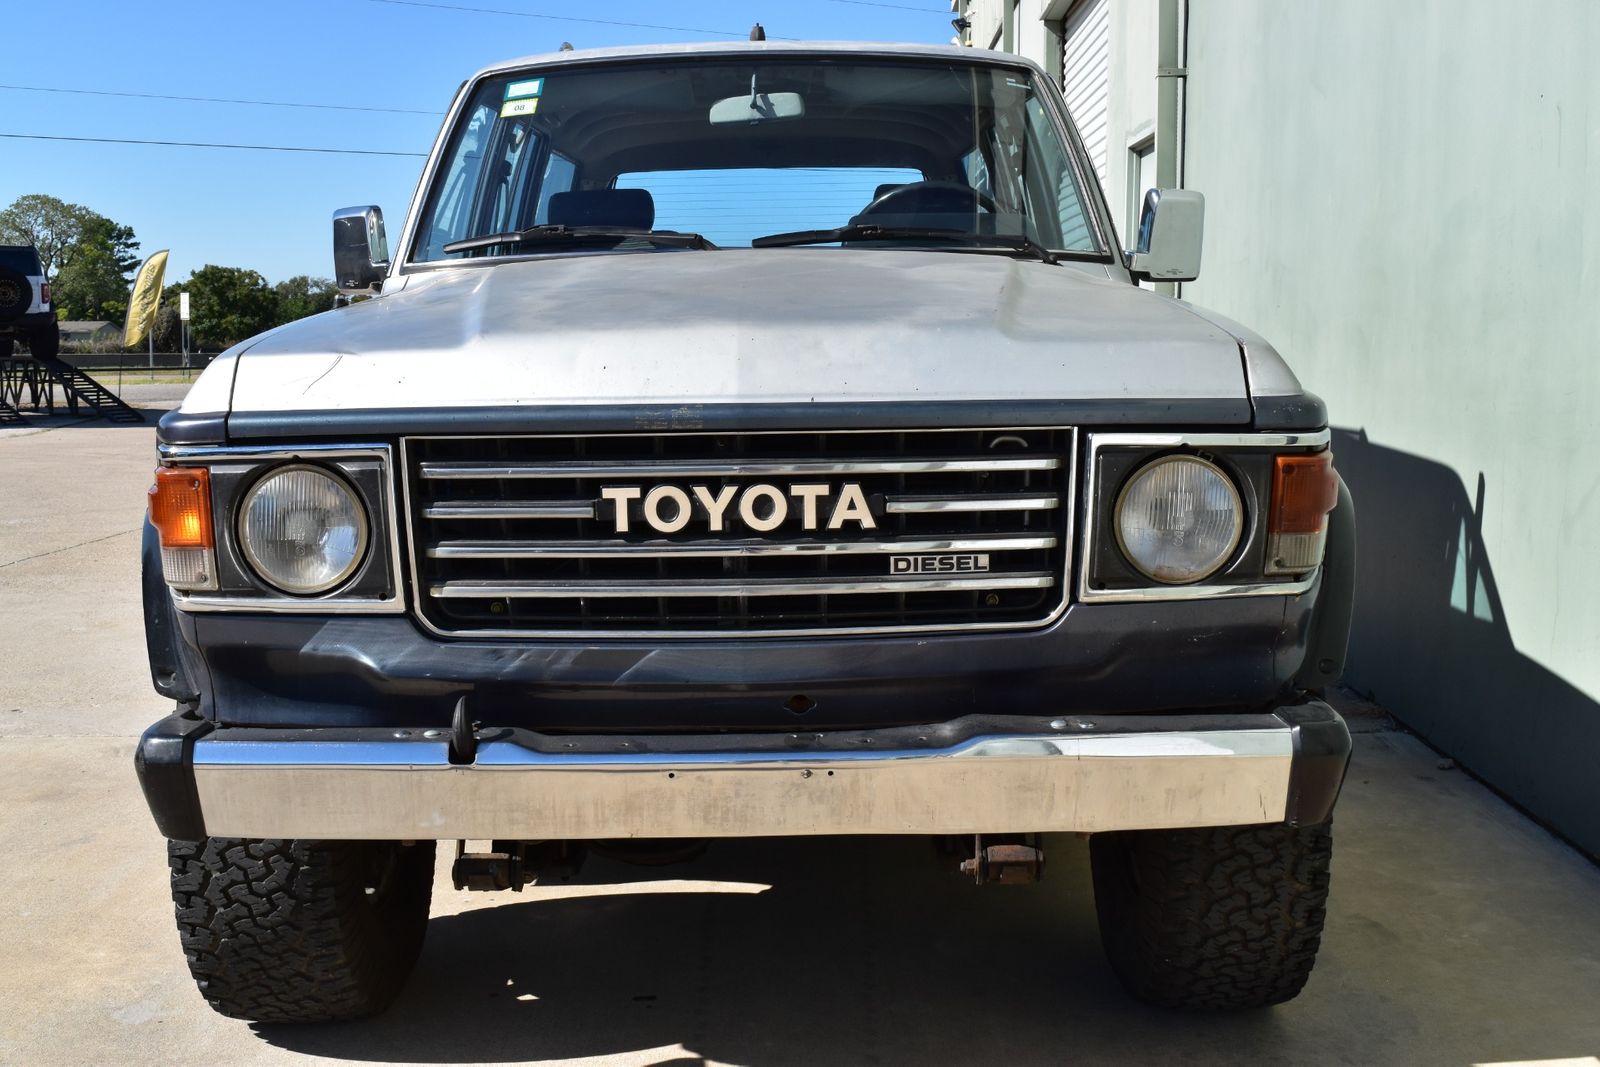 1987-toyota-land-cruiser-jh60-for-sale-07